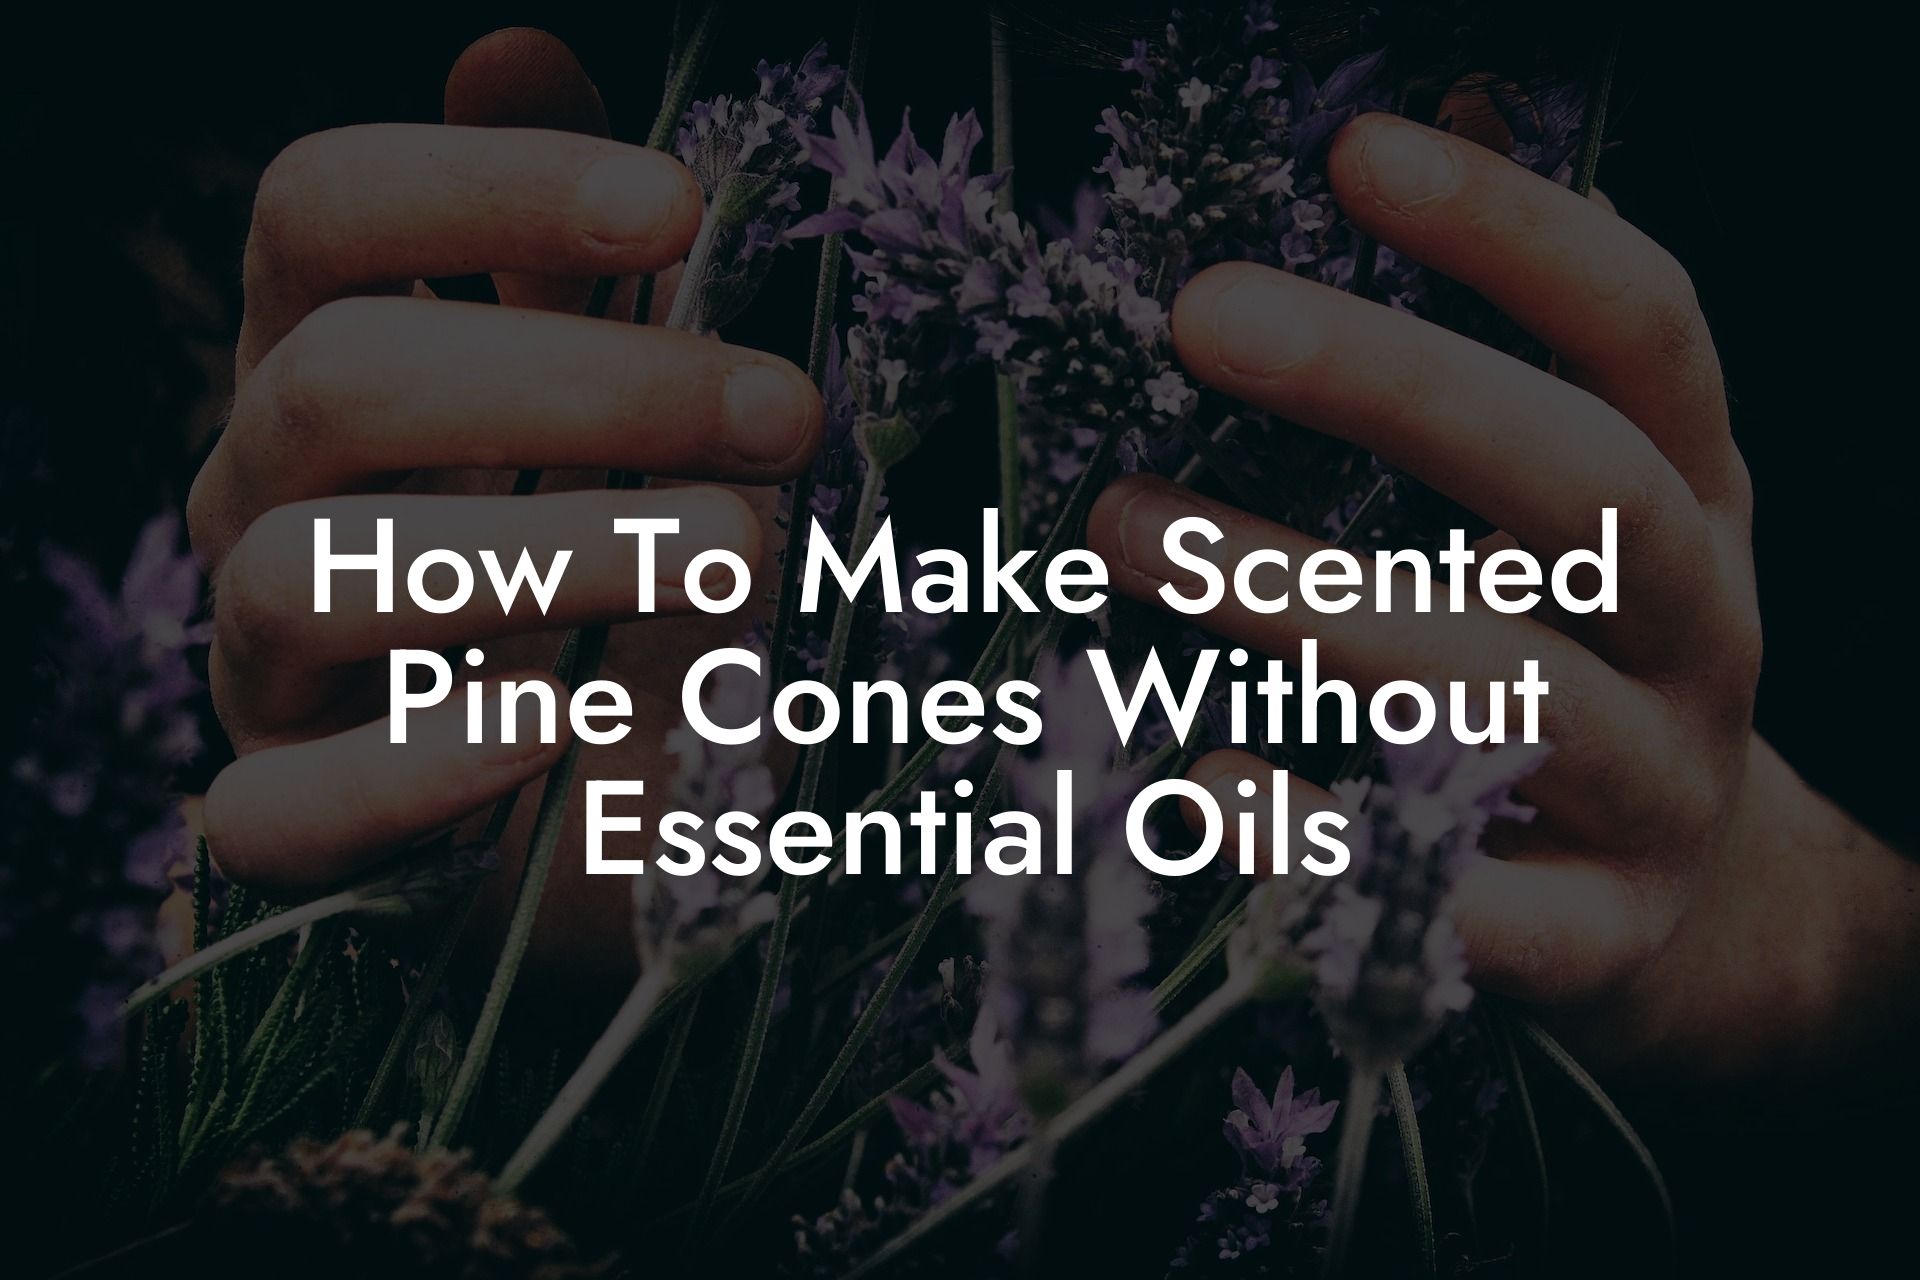 How To Make Scented Pine Cones Without Essential Oils